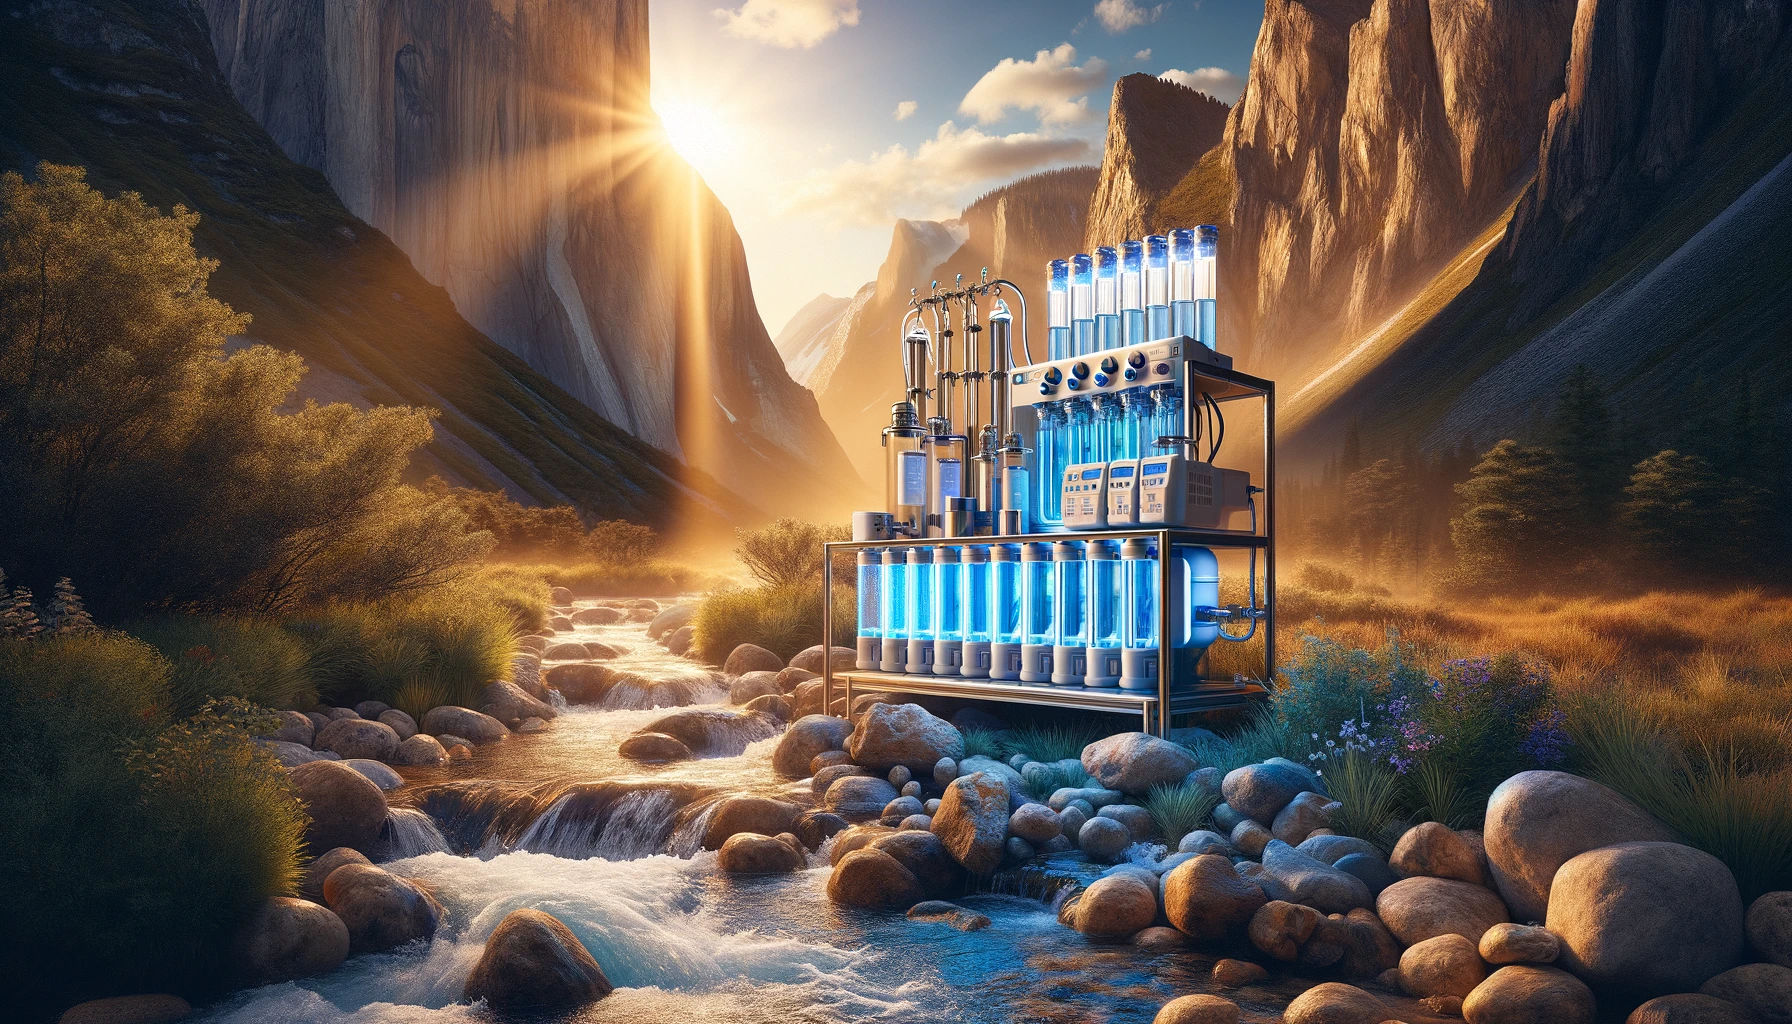 Sophisticated outdoor water purification setup with UV light units and chemical treatment areas beside a crystal-clear mountain stream, set against a rugged wilderness backdrop, illuminated by the warm, golden light of sunset, showcasing the harmony of modern technology and natural beauty for ensuring drinking water safety